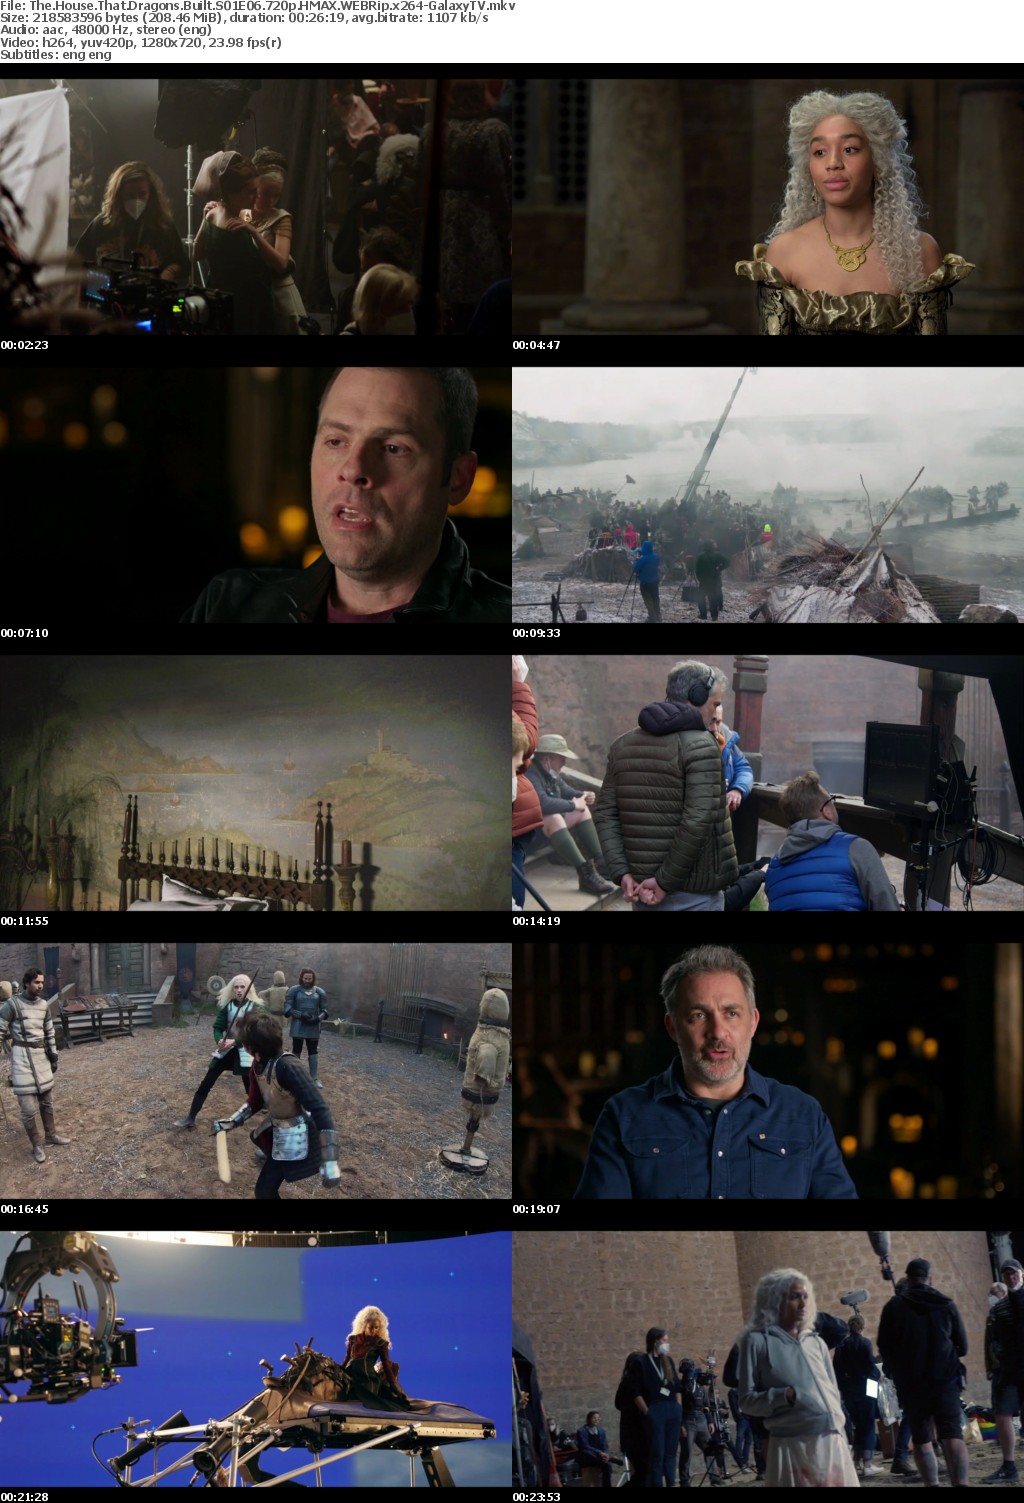 The House That Dragons Built S01 COMPLETE 720p HMAX WEBRip x264-GalaxyTV